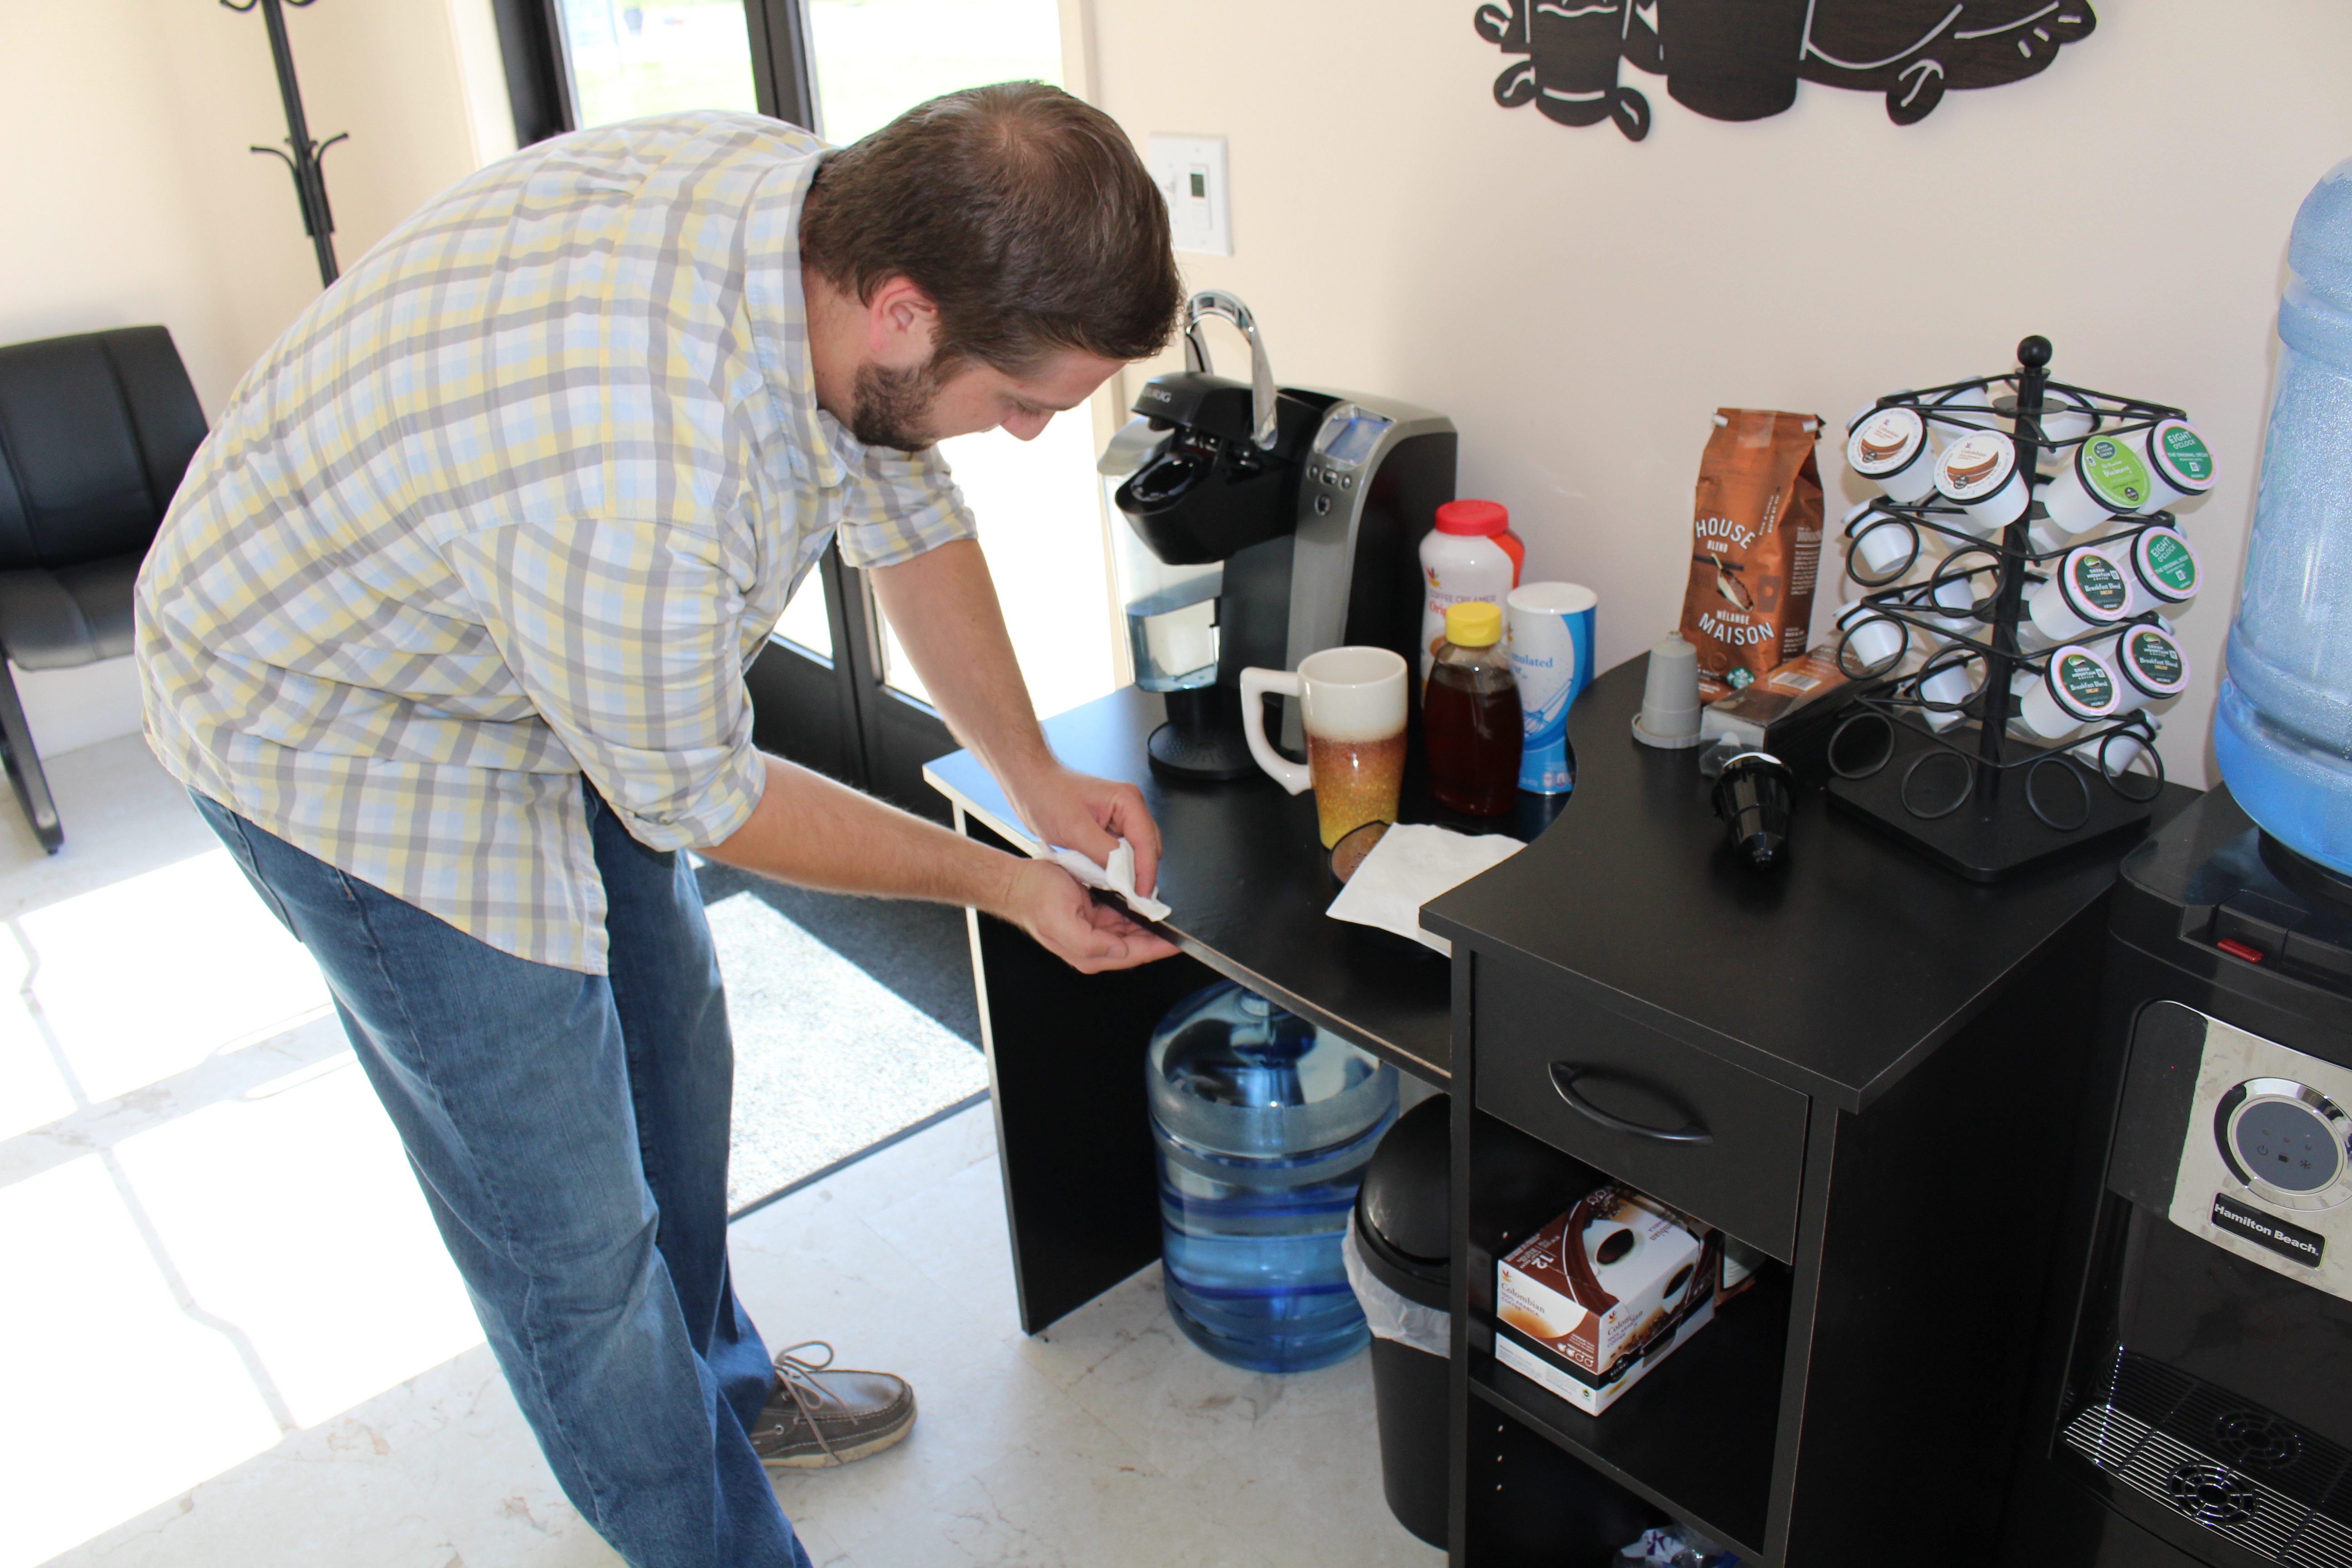 A picture of a man at a coffee maker.